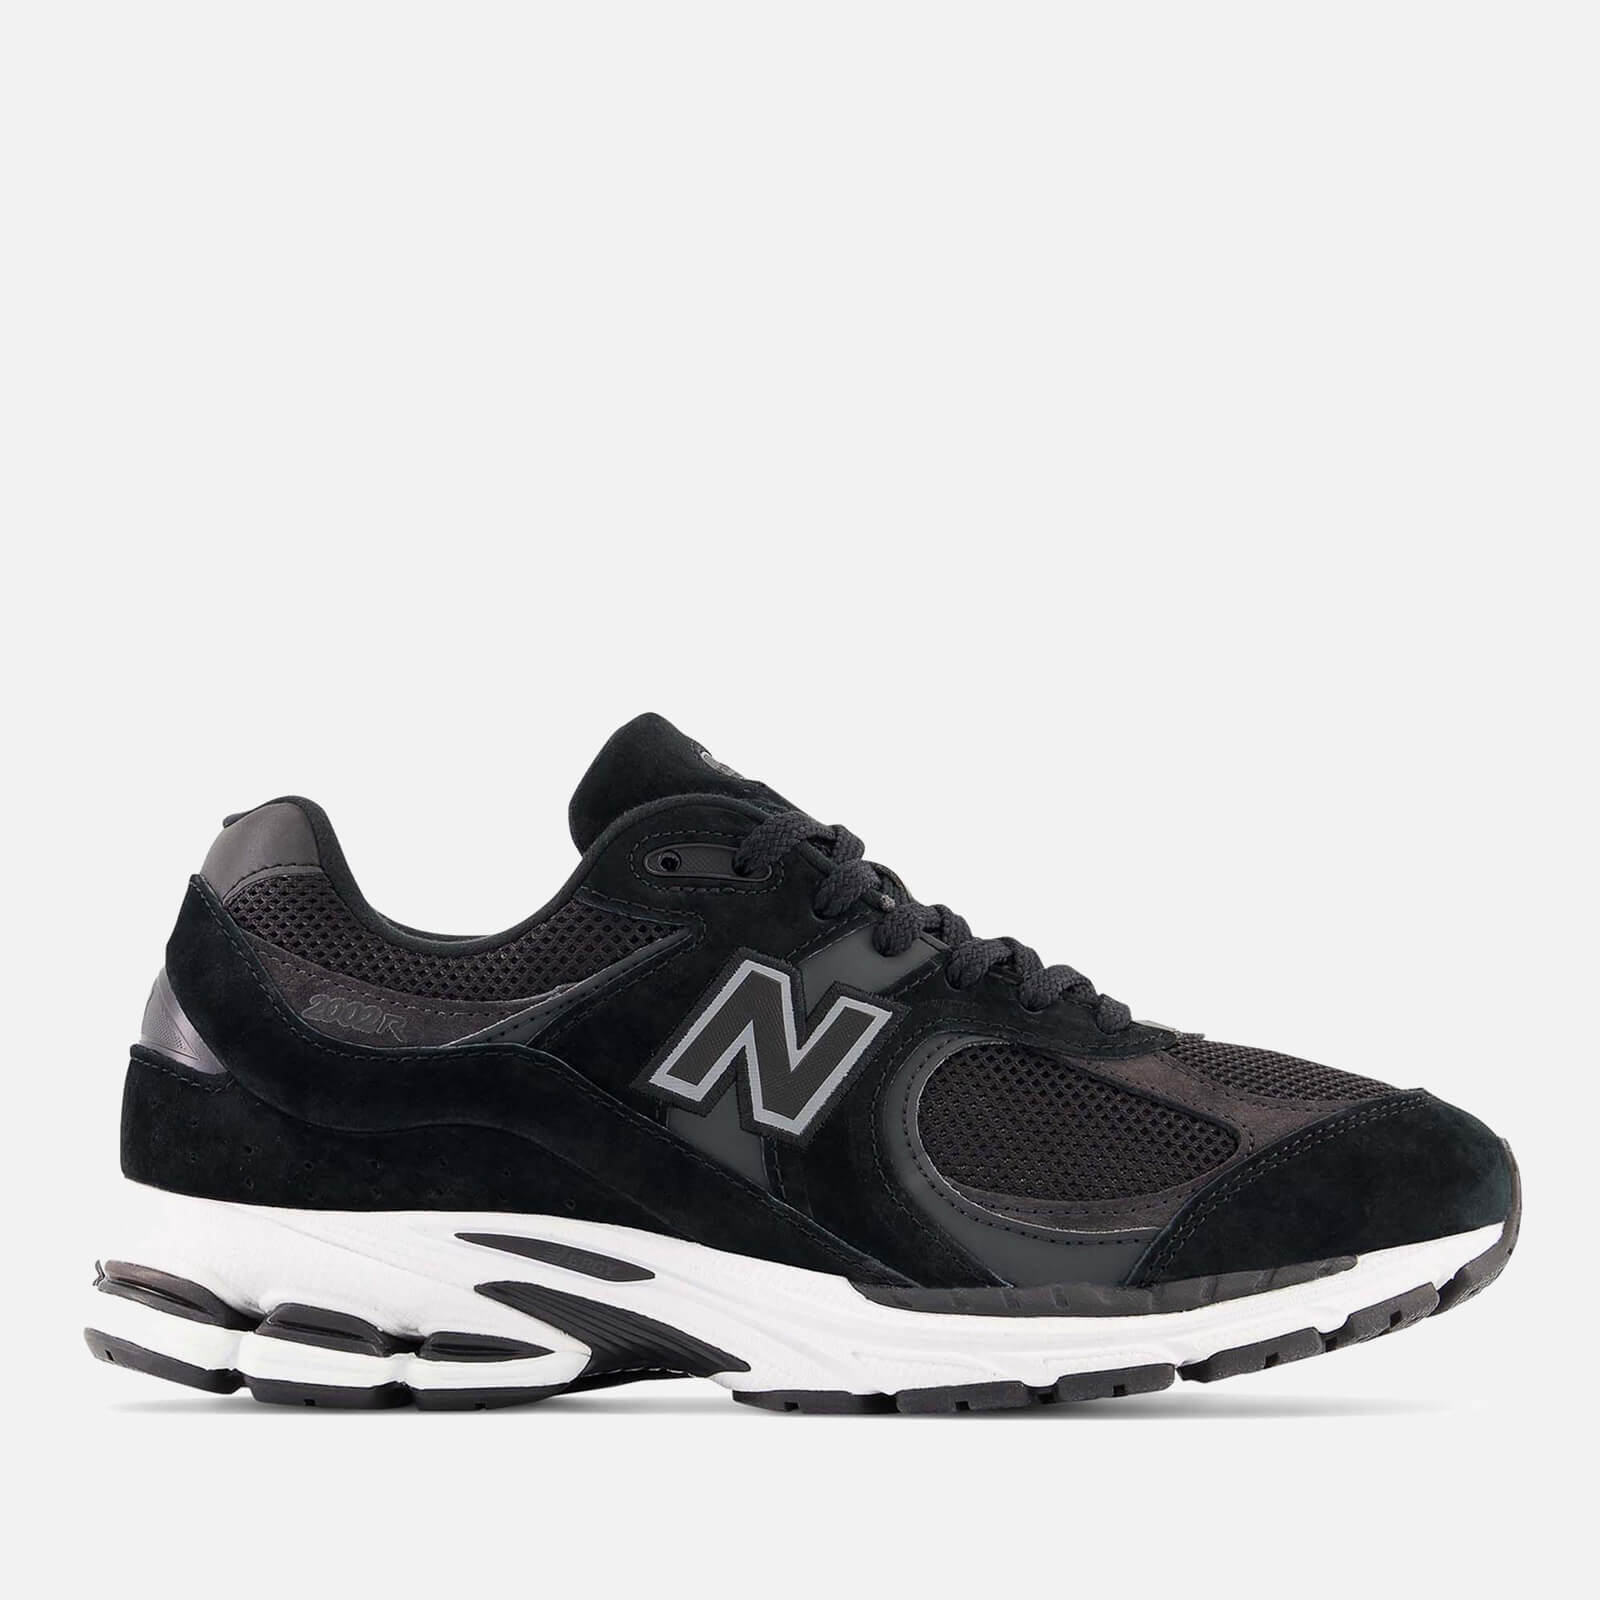 New Balance Men's 2002r Suede and Mesh Trainers - UK 9